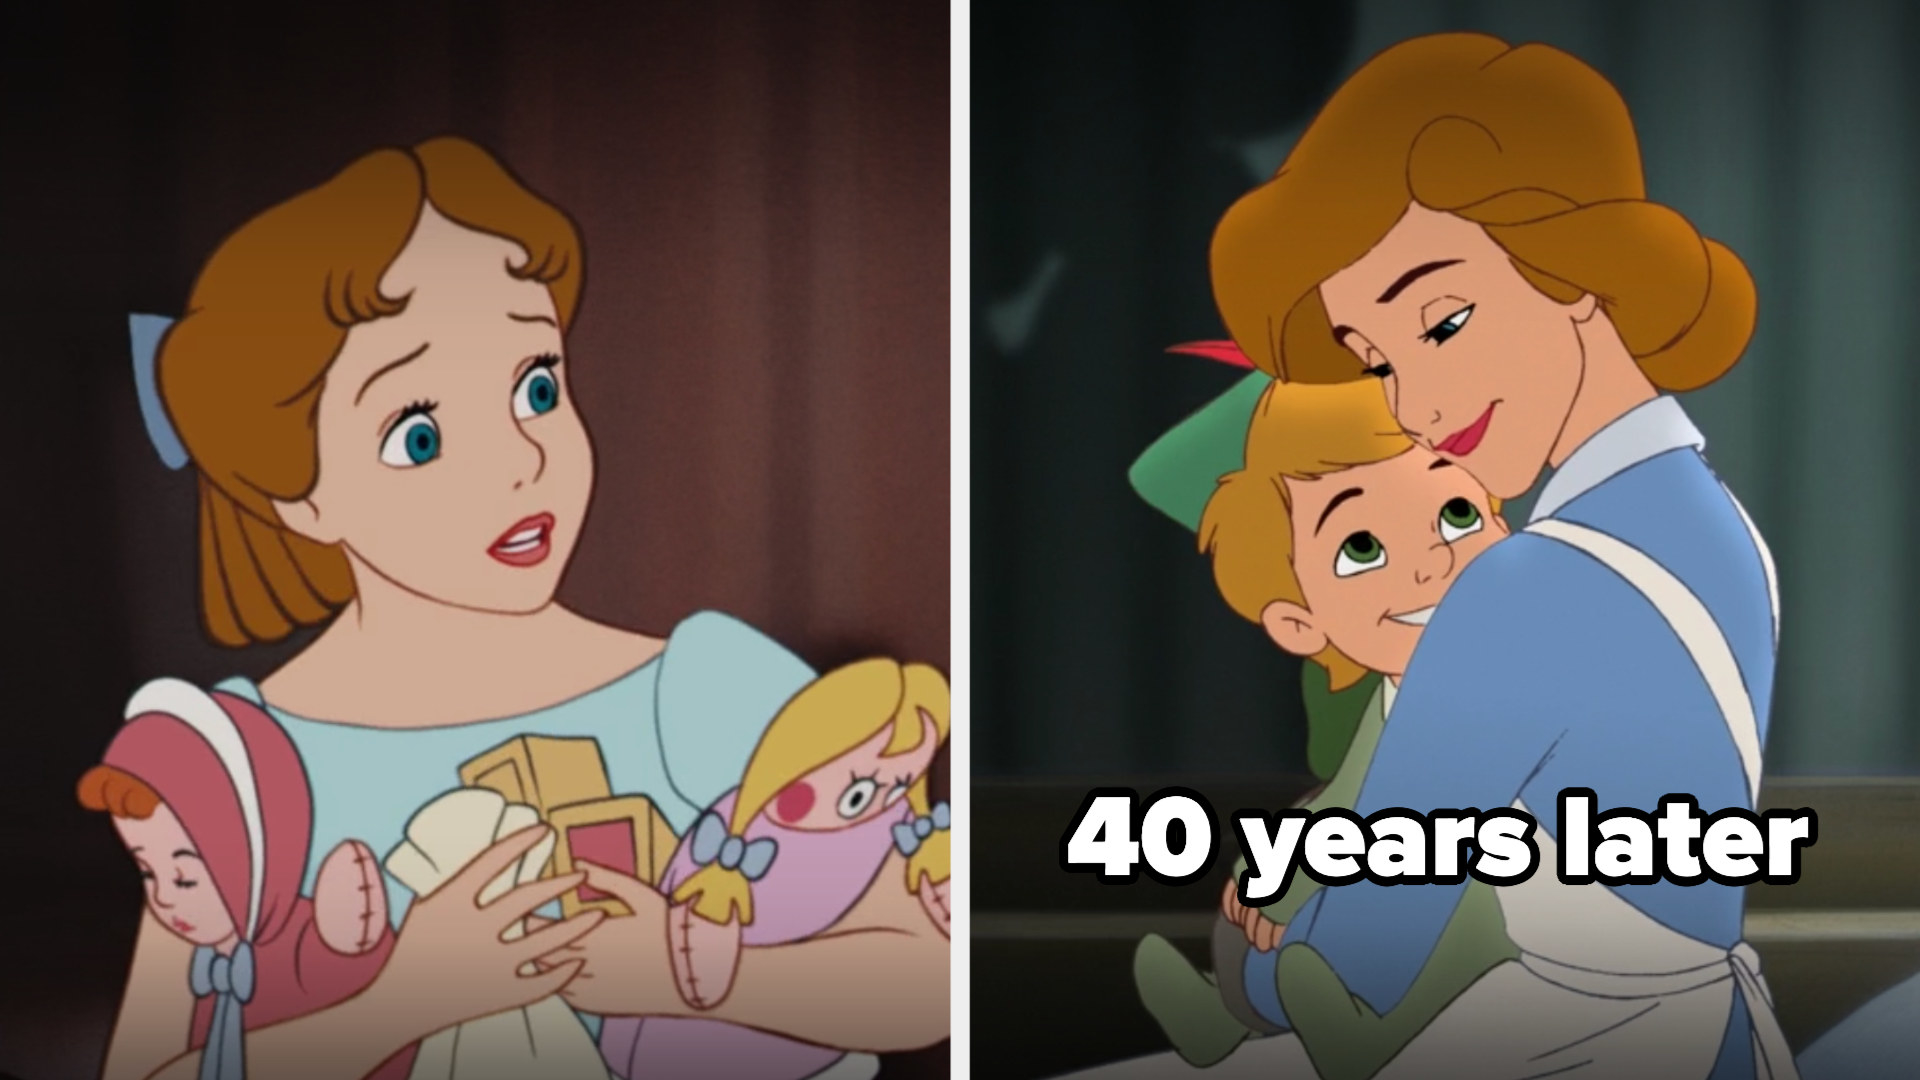 Wendy as a kid, then 40 years later with a young son